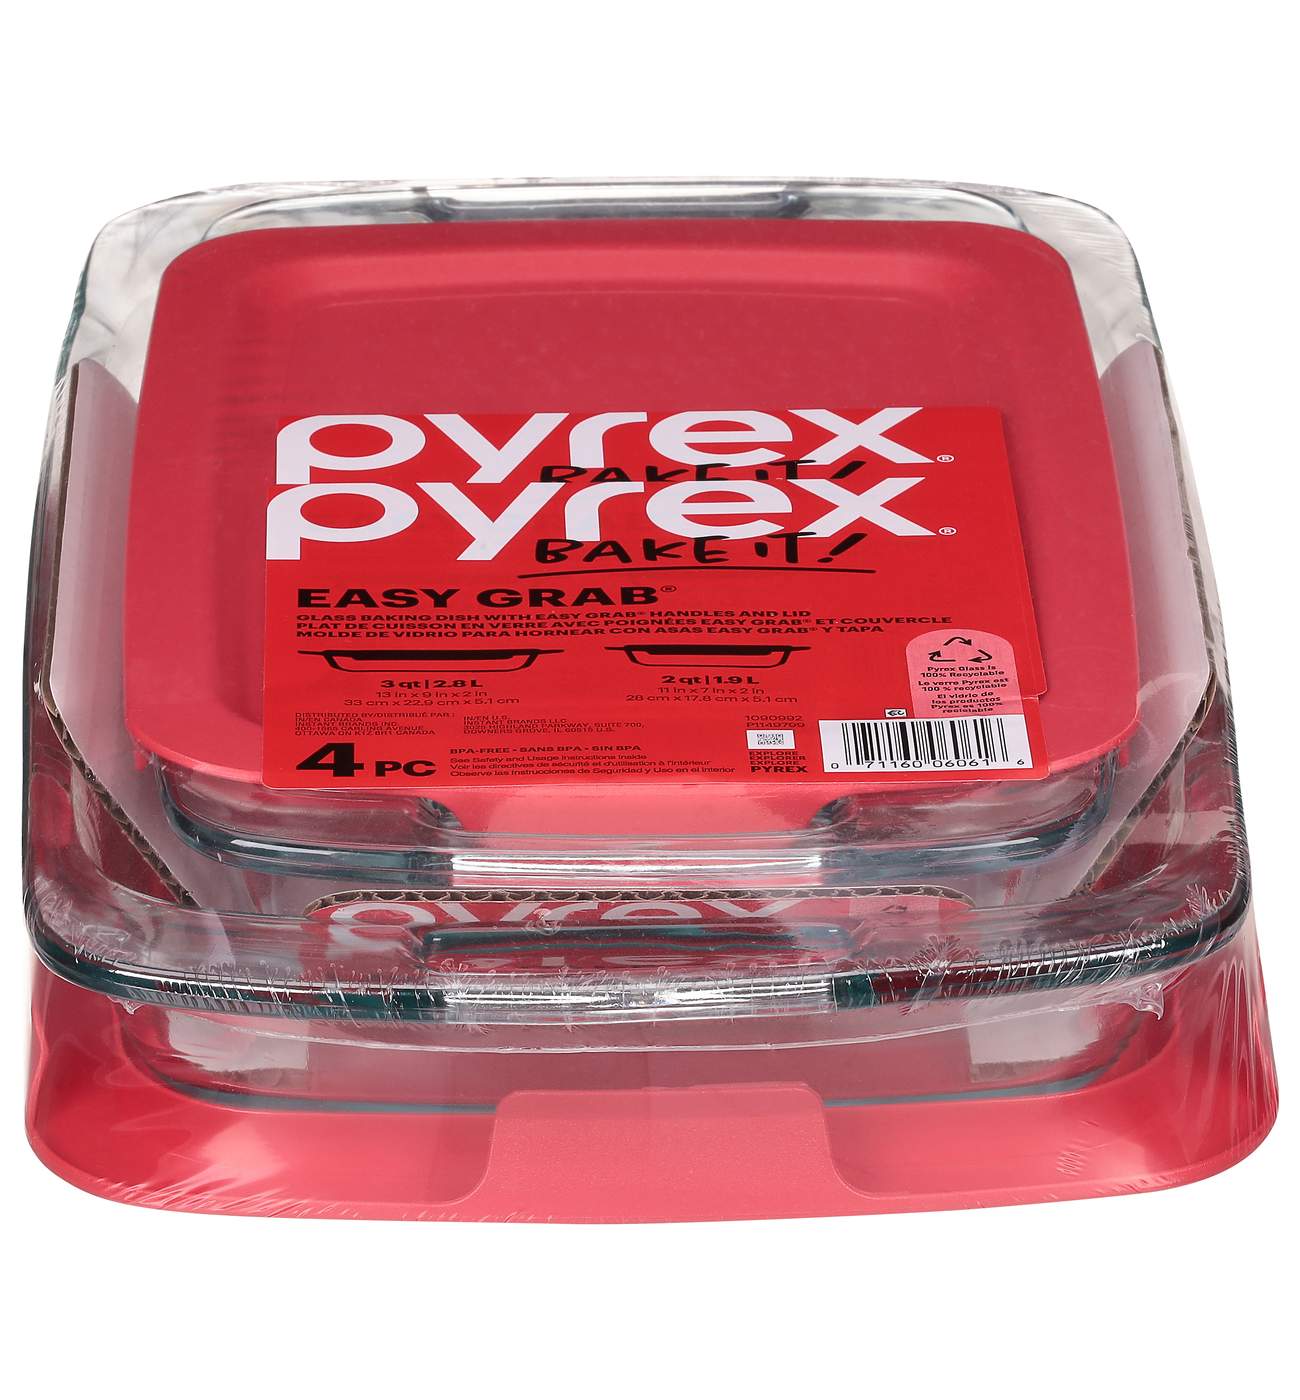 Pyrex Easy Grab Rectangle Glass Baking Set with Lids; image 2 of 3